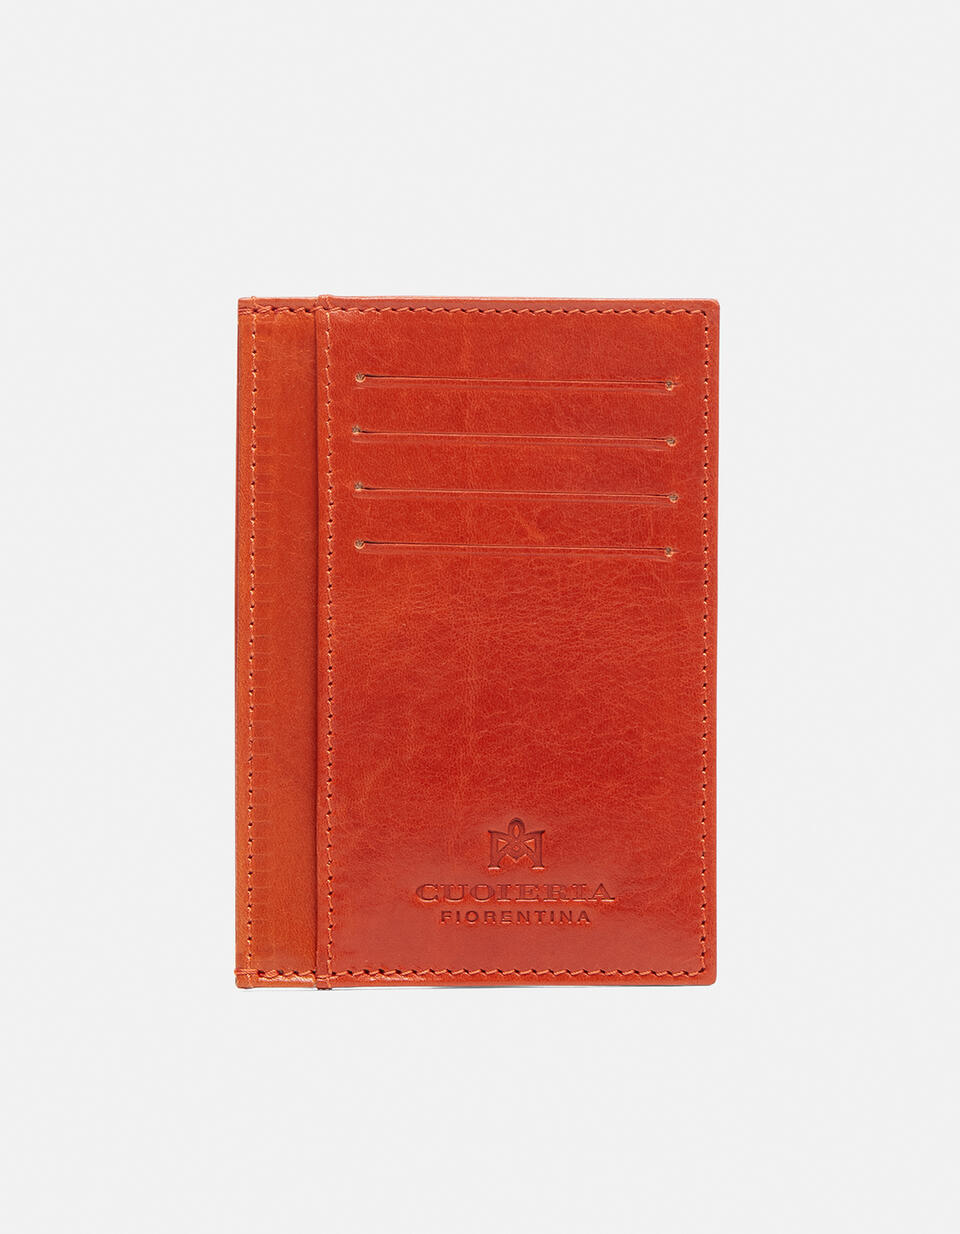 Leather briefcase - Card Holders - Women's Wallets | Wallets ARANCIO - Card Holders - Women's Wallets | WalletsCuoieria Fiorentina